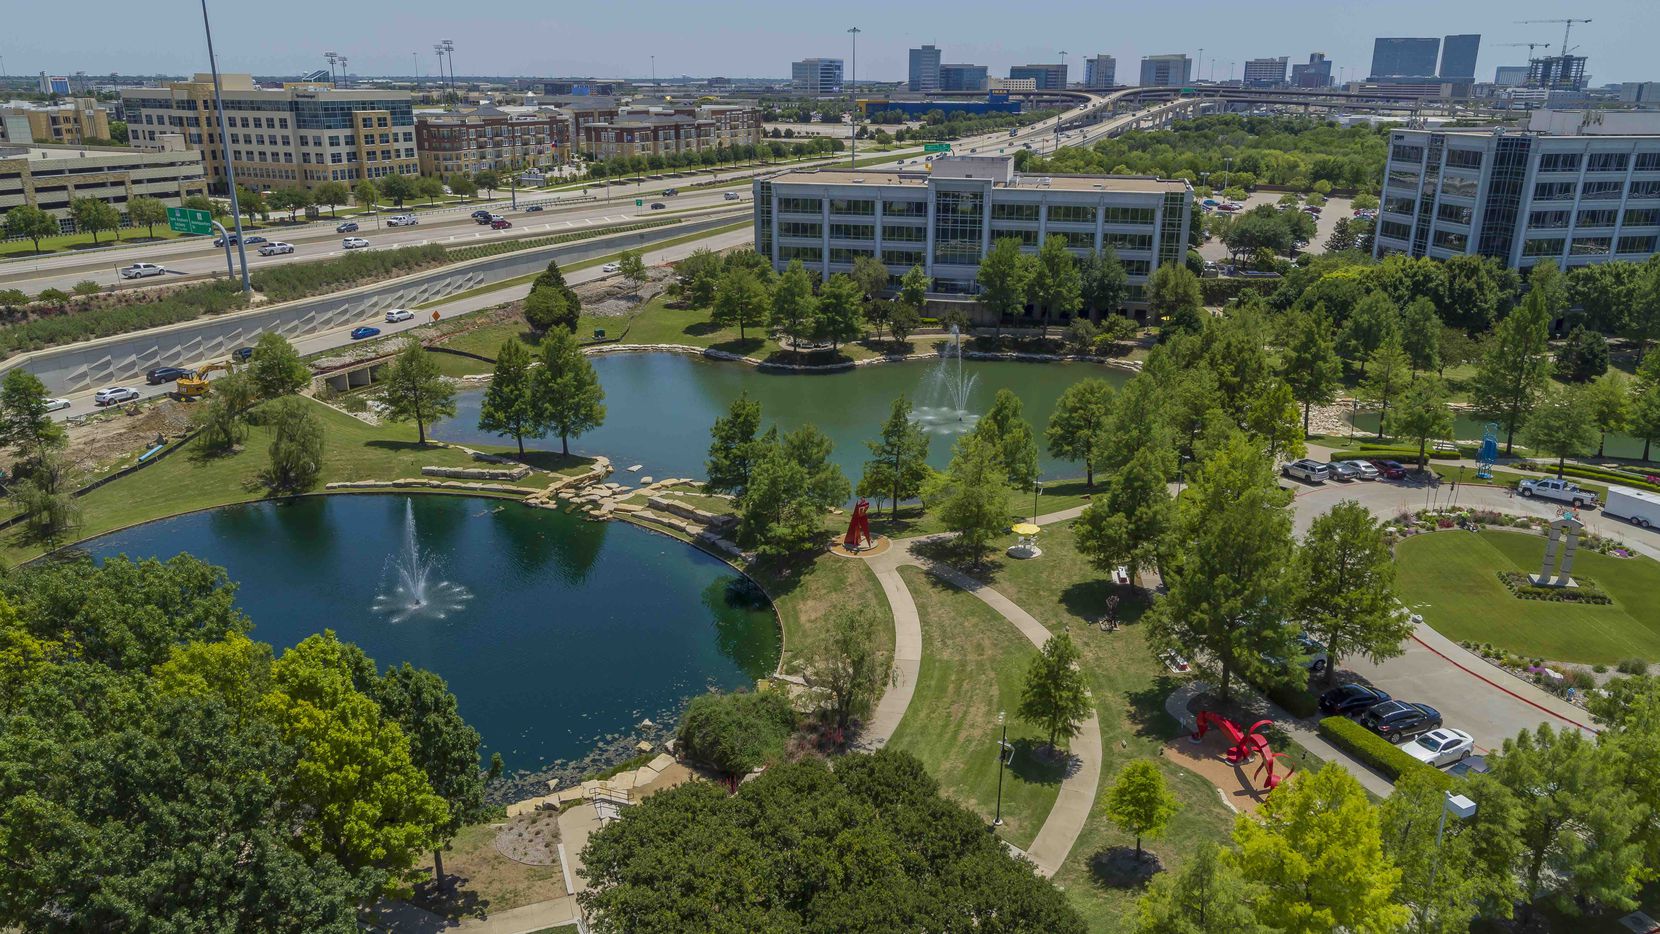 Hall Park started out more than 20 years ago and is the largest office campus in Frisco. It...